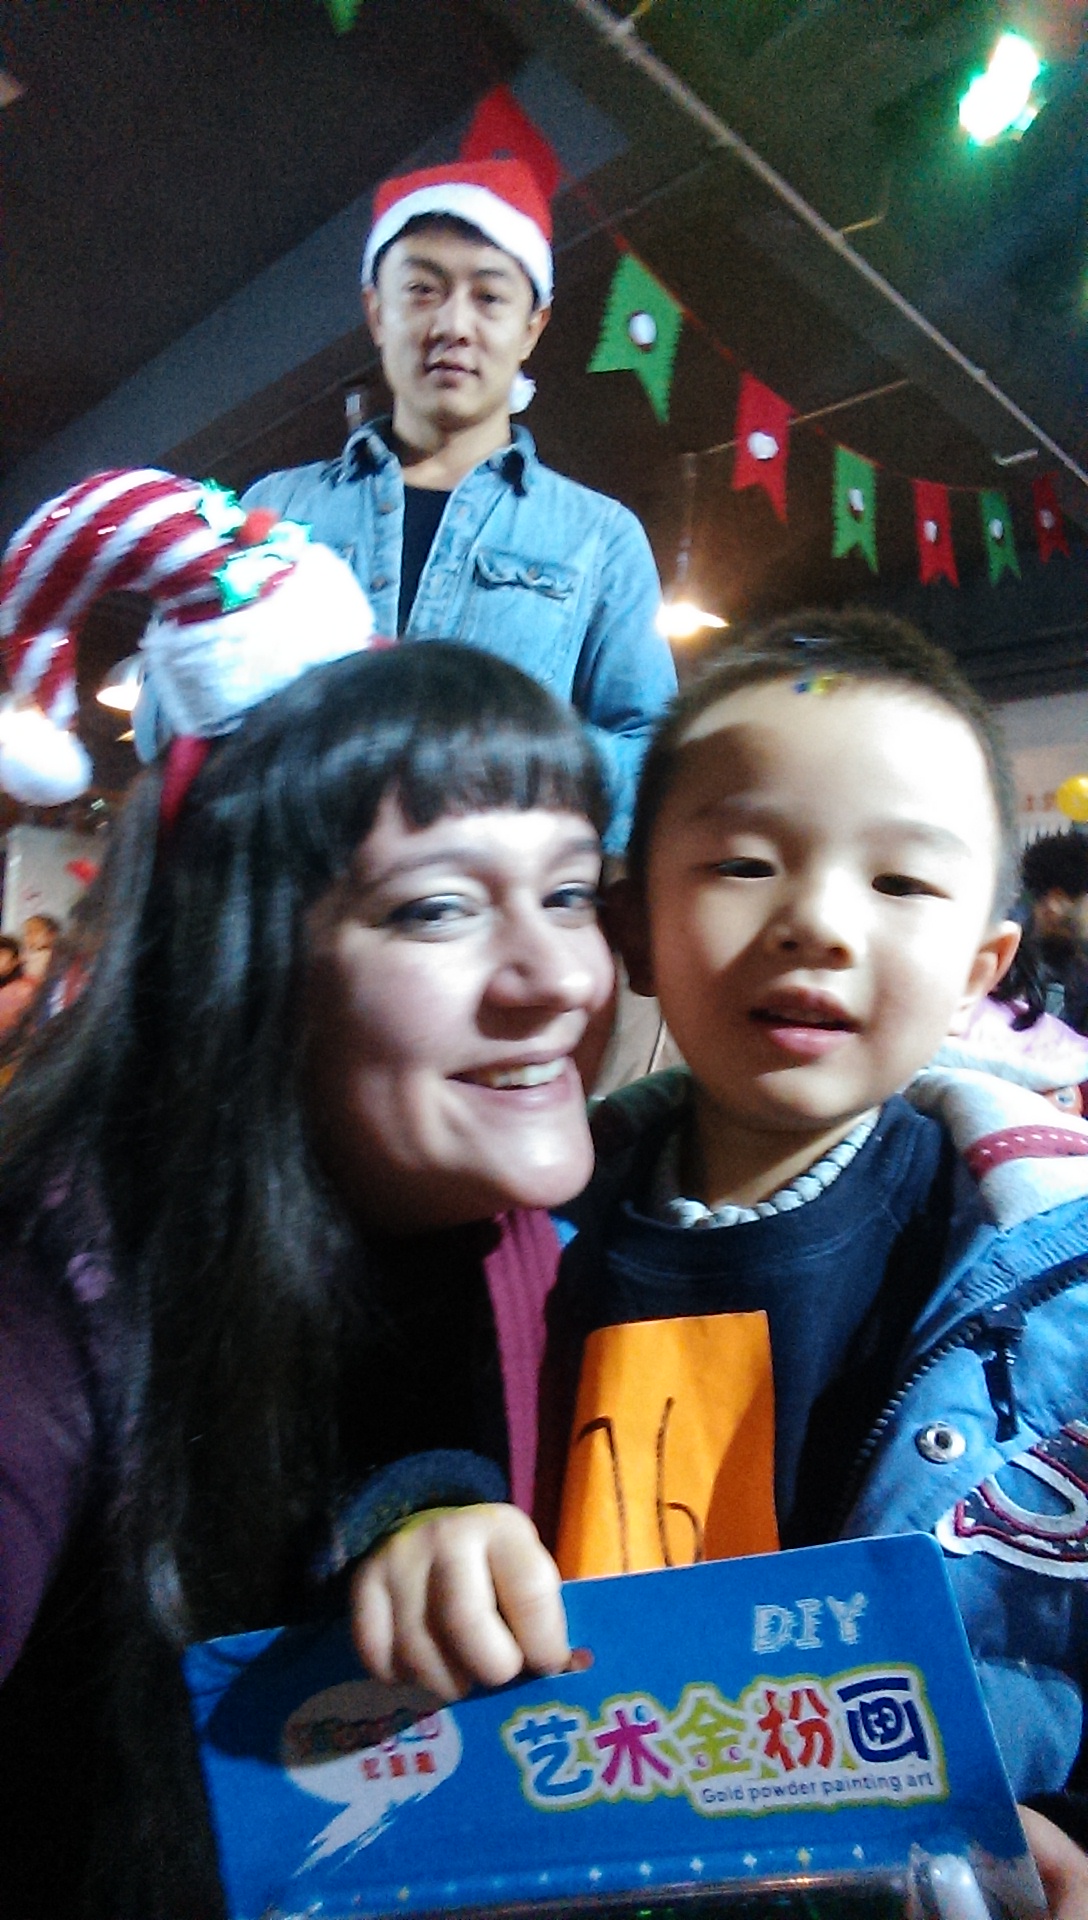 One of my youngest students, Smile.  I especially love Ouyang's photobomb lol!